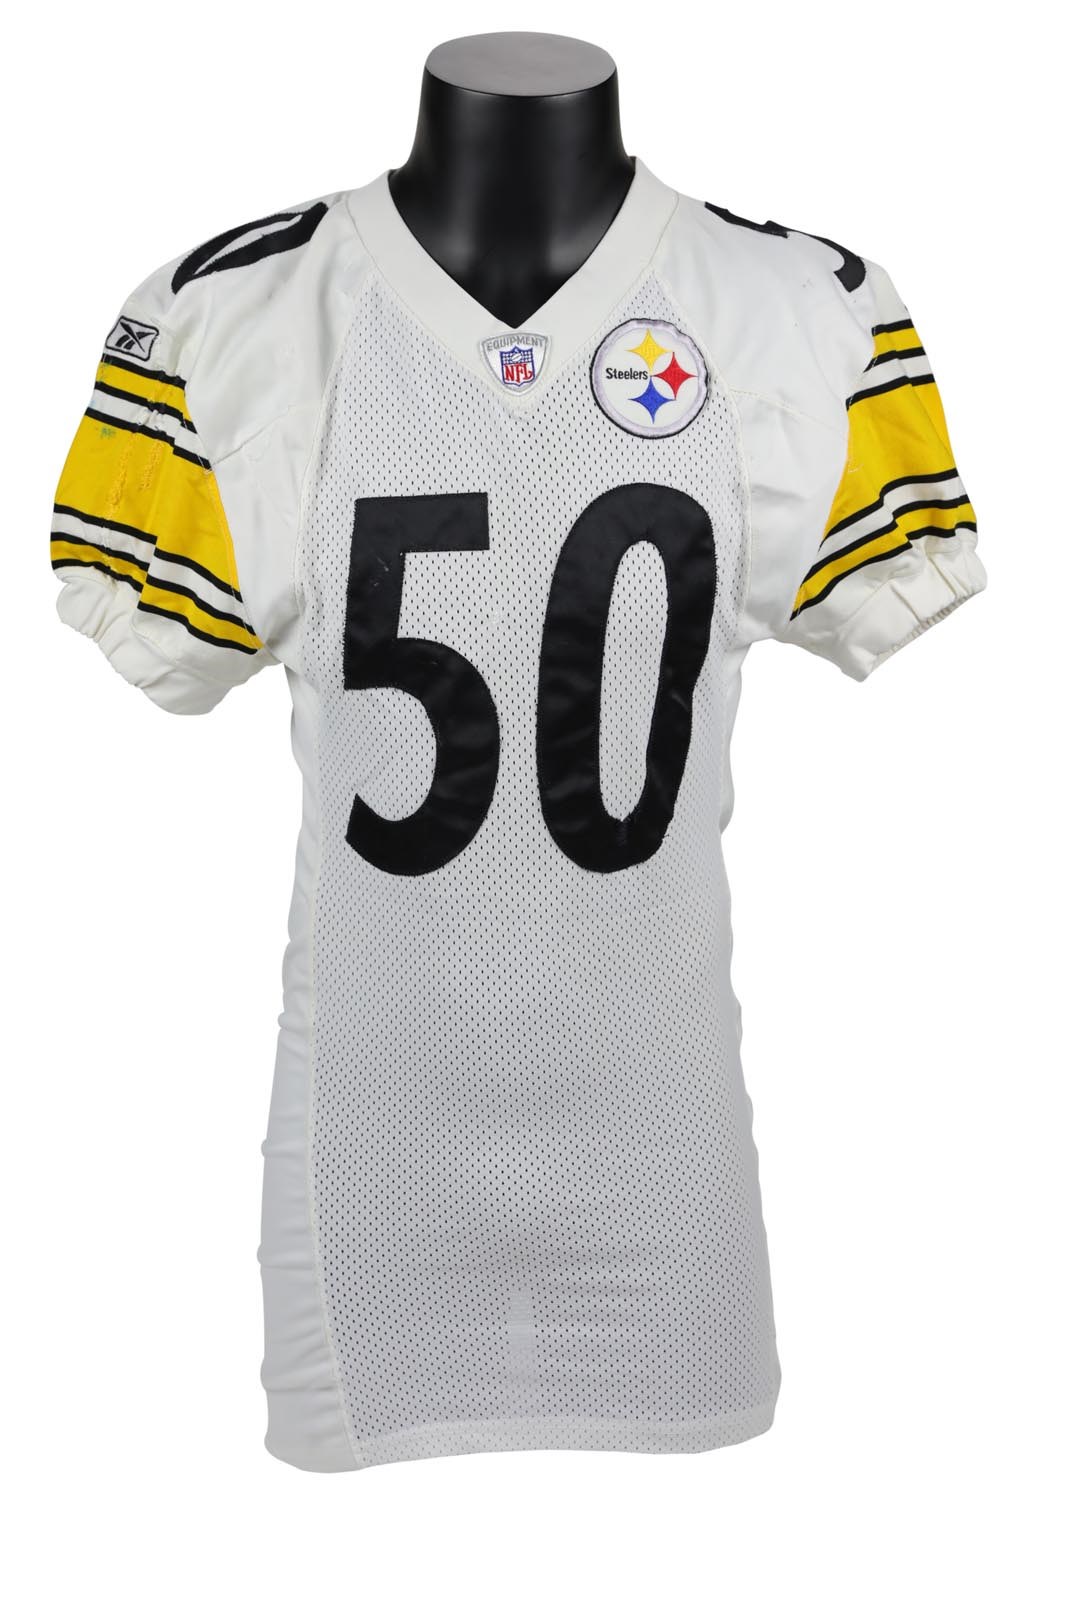 The Pittsburgh Steelers Game Worn Jersey Archive - 2002 Larry Foote Pittsburgh Steelers AFC Divisional Game Worn Jersey (Photo-Matched)